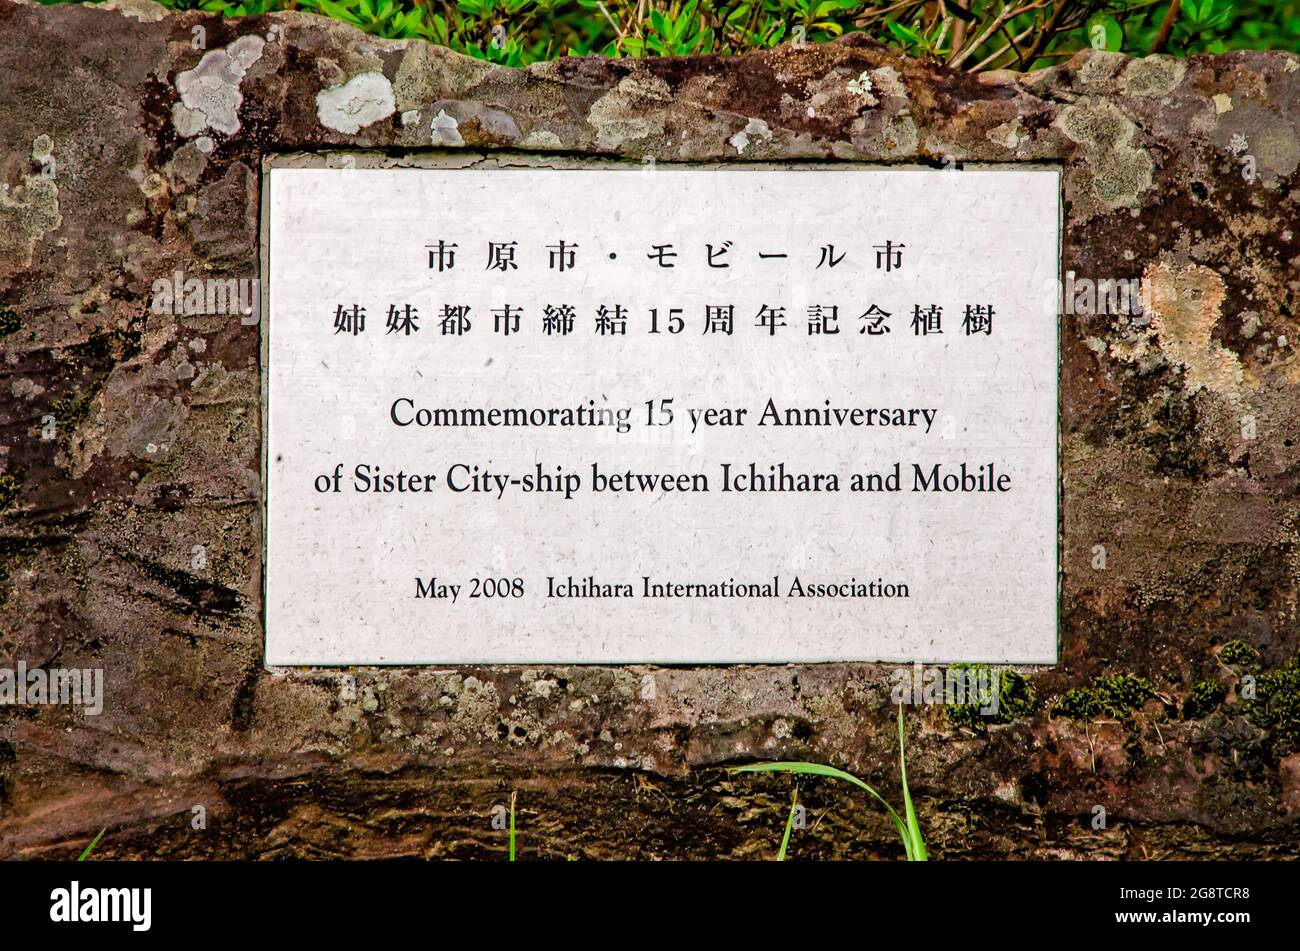 A plaque commemorates the Sister City relationship between Mobile and Ichihara, Japan at the Charles Wood Japanese Garden in Mobile, Alabama. Stock Photo